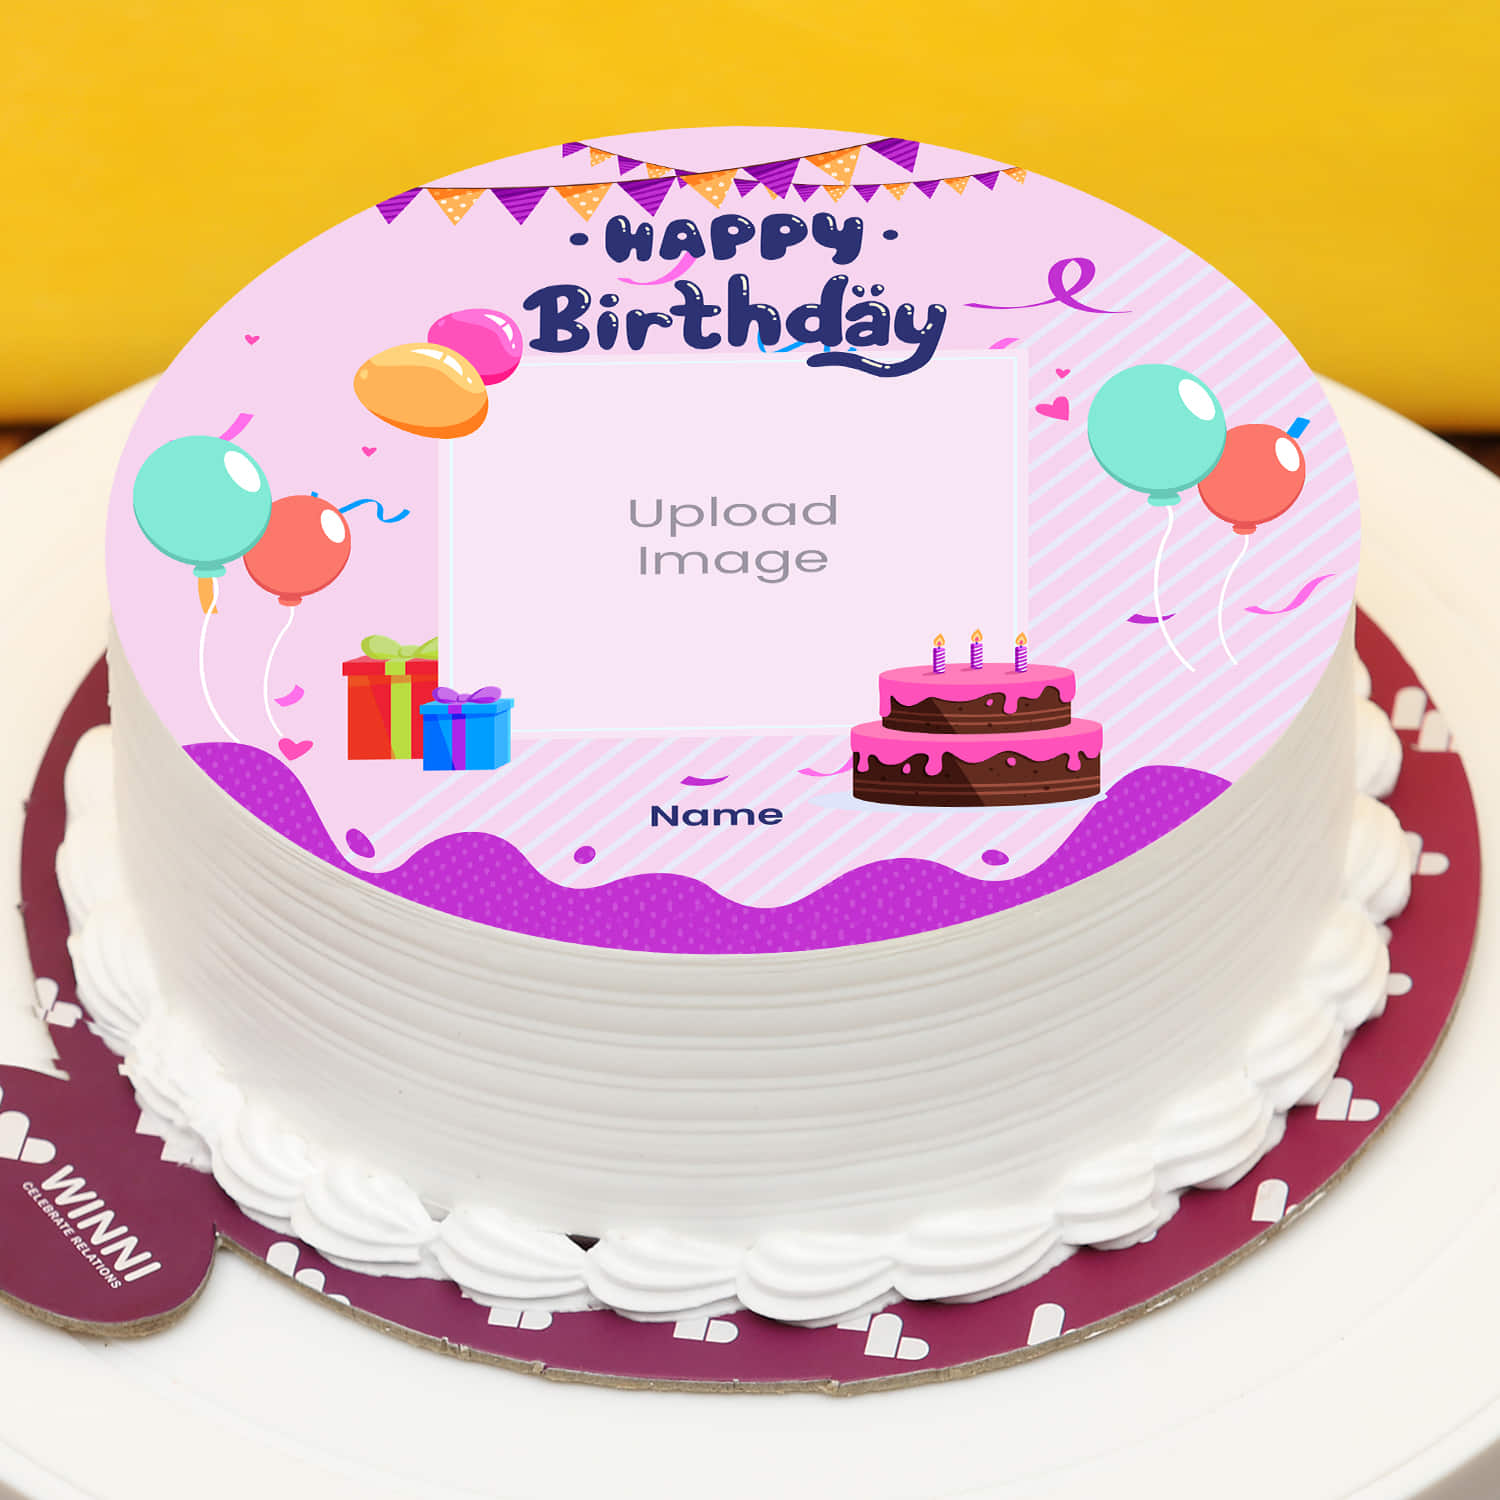 hbd. Minimalist cake available... - Milky Cakes and Sweets | Facebook